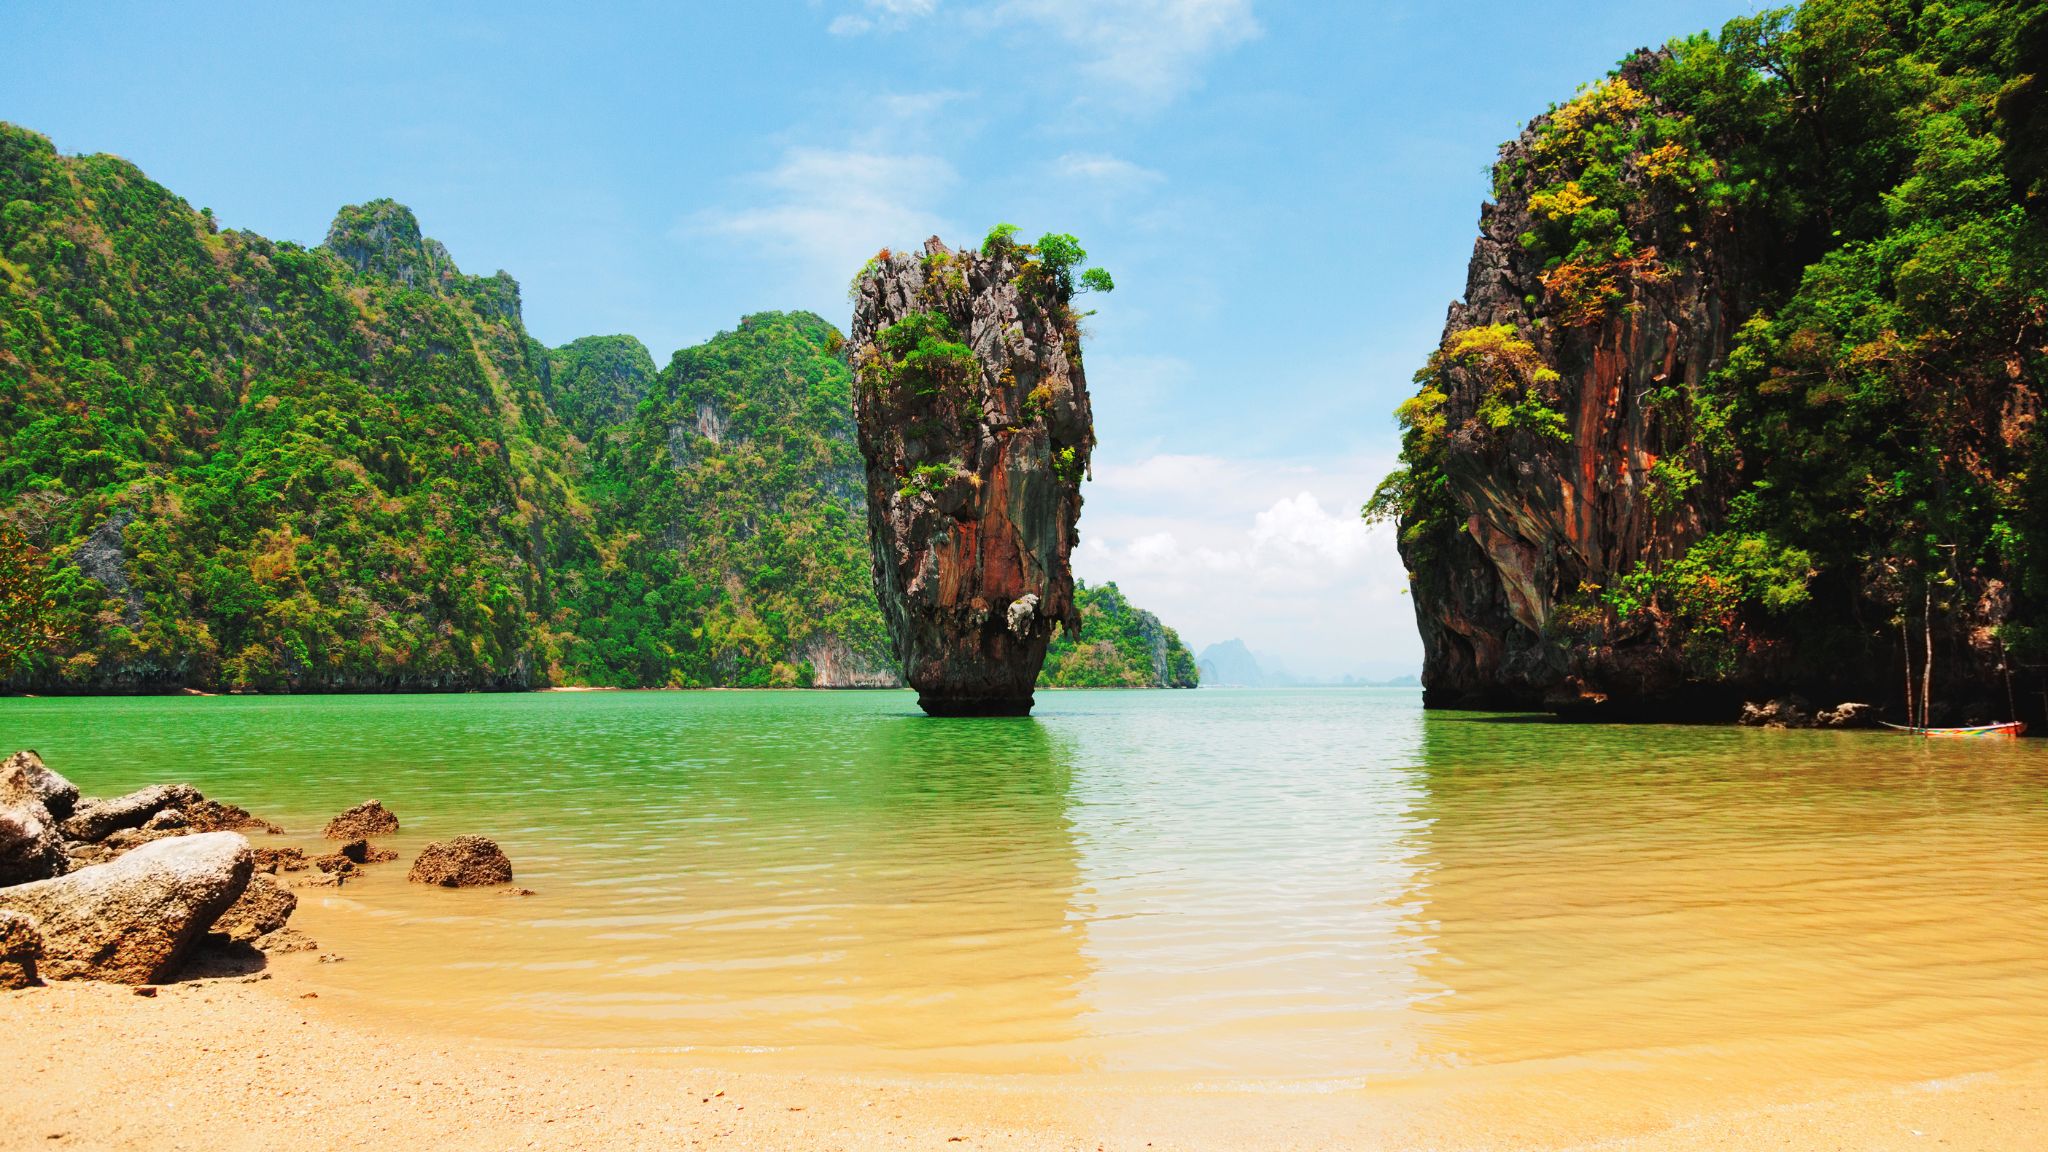 Day 5 Admire The Famous James Bond Island